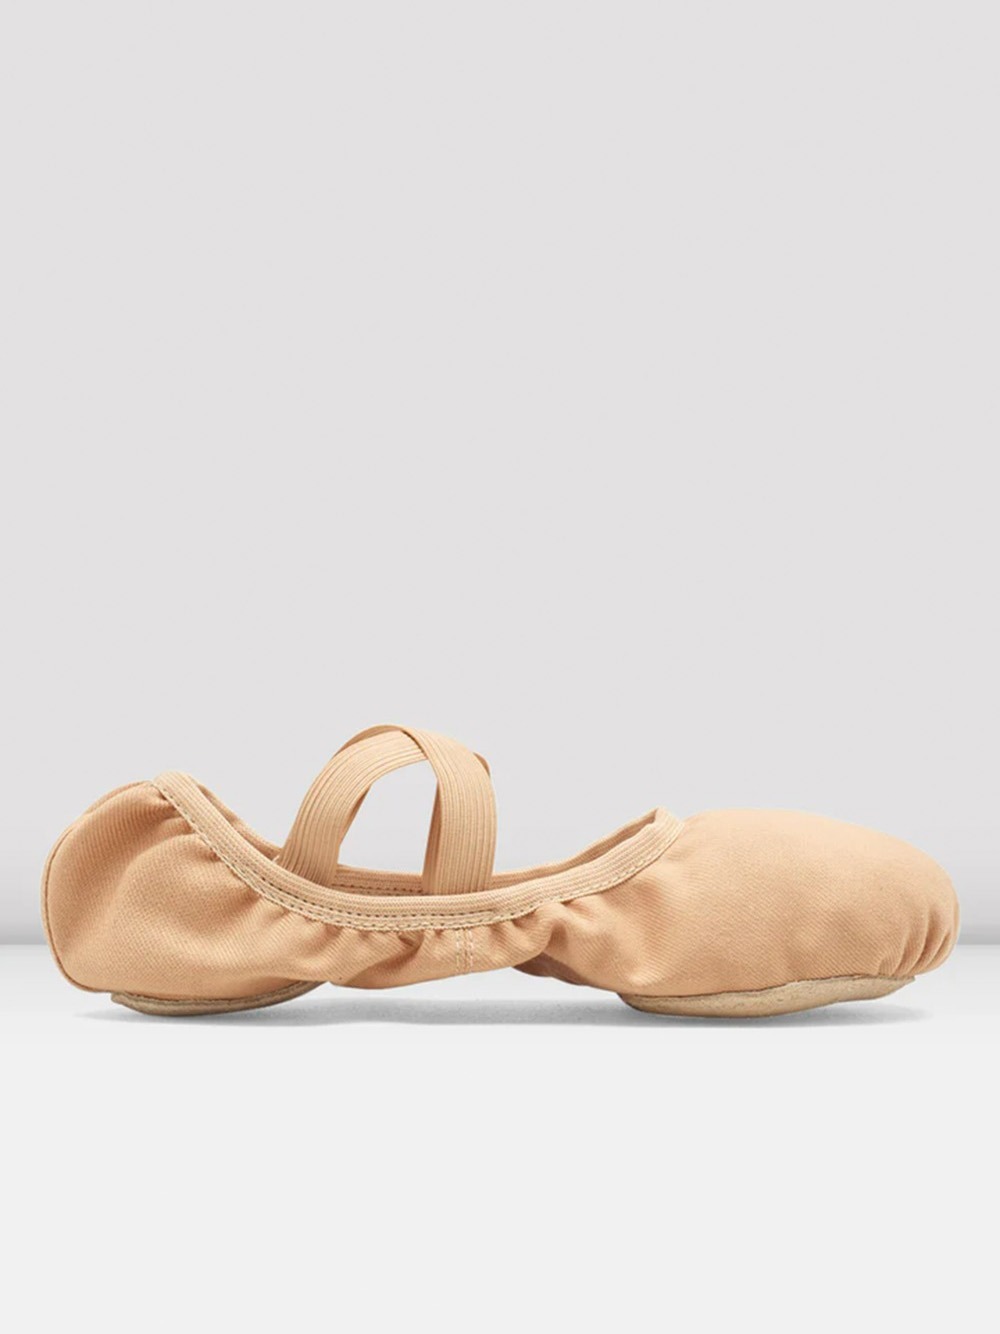 PERFORMA STRETCH CANVAS BALLET SHOES - SAND